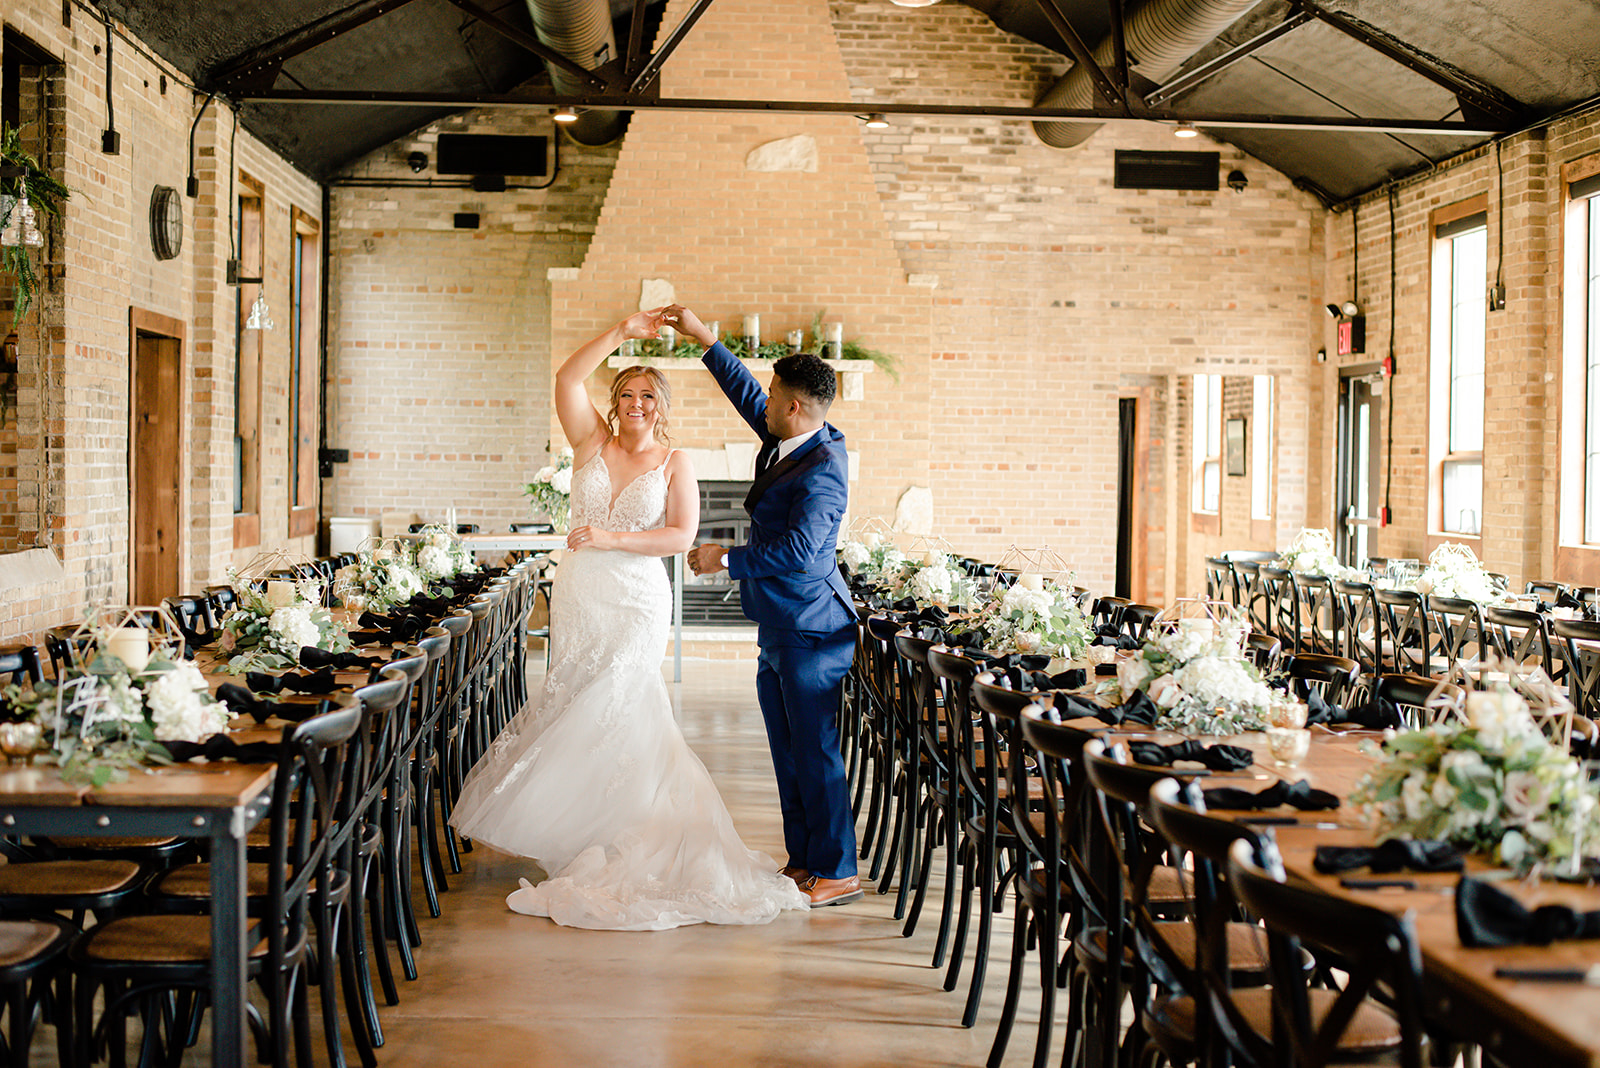 Anna & Mike: Celebrating Their Love at a Historical Wedding Venue 